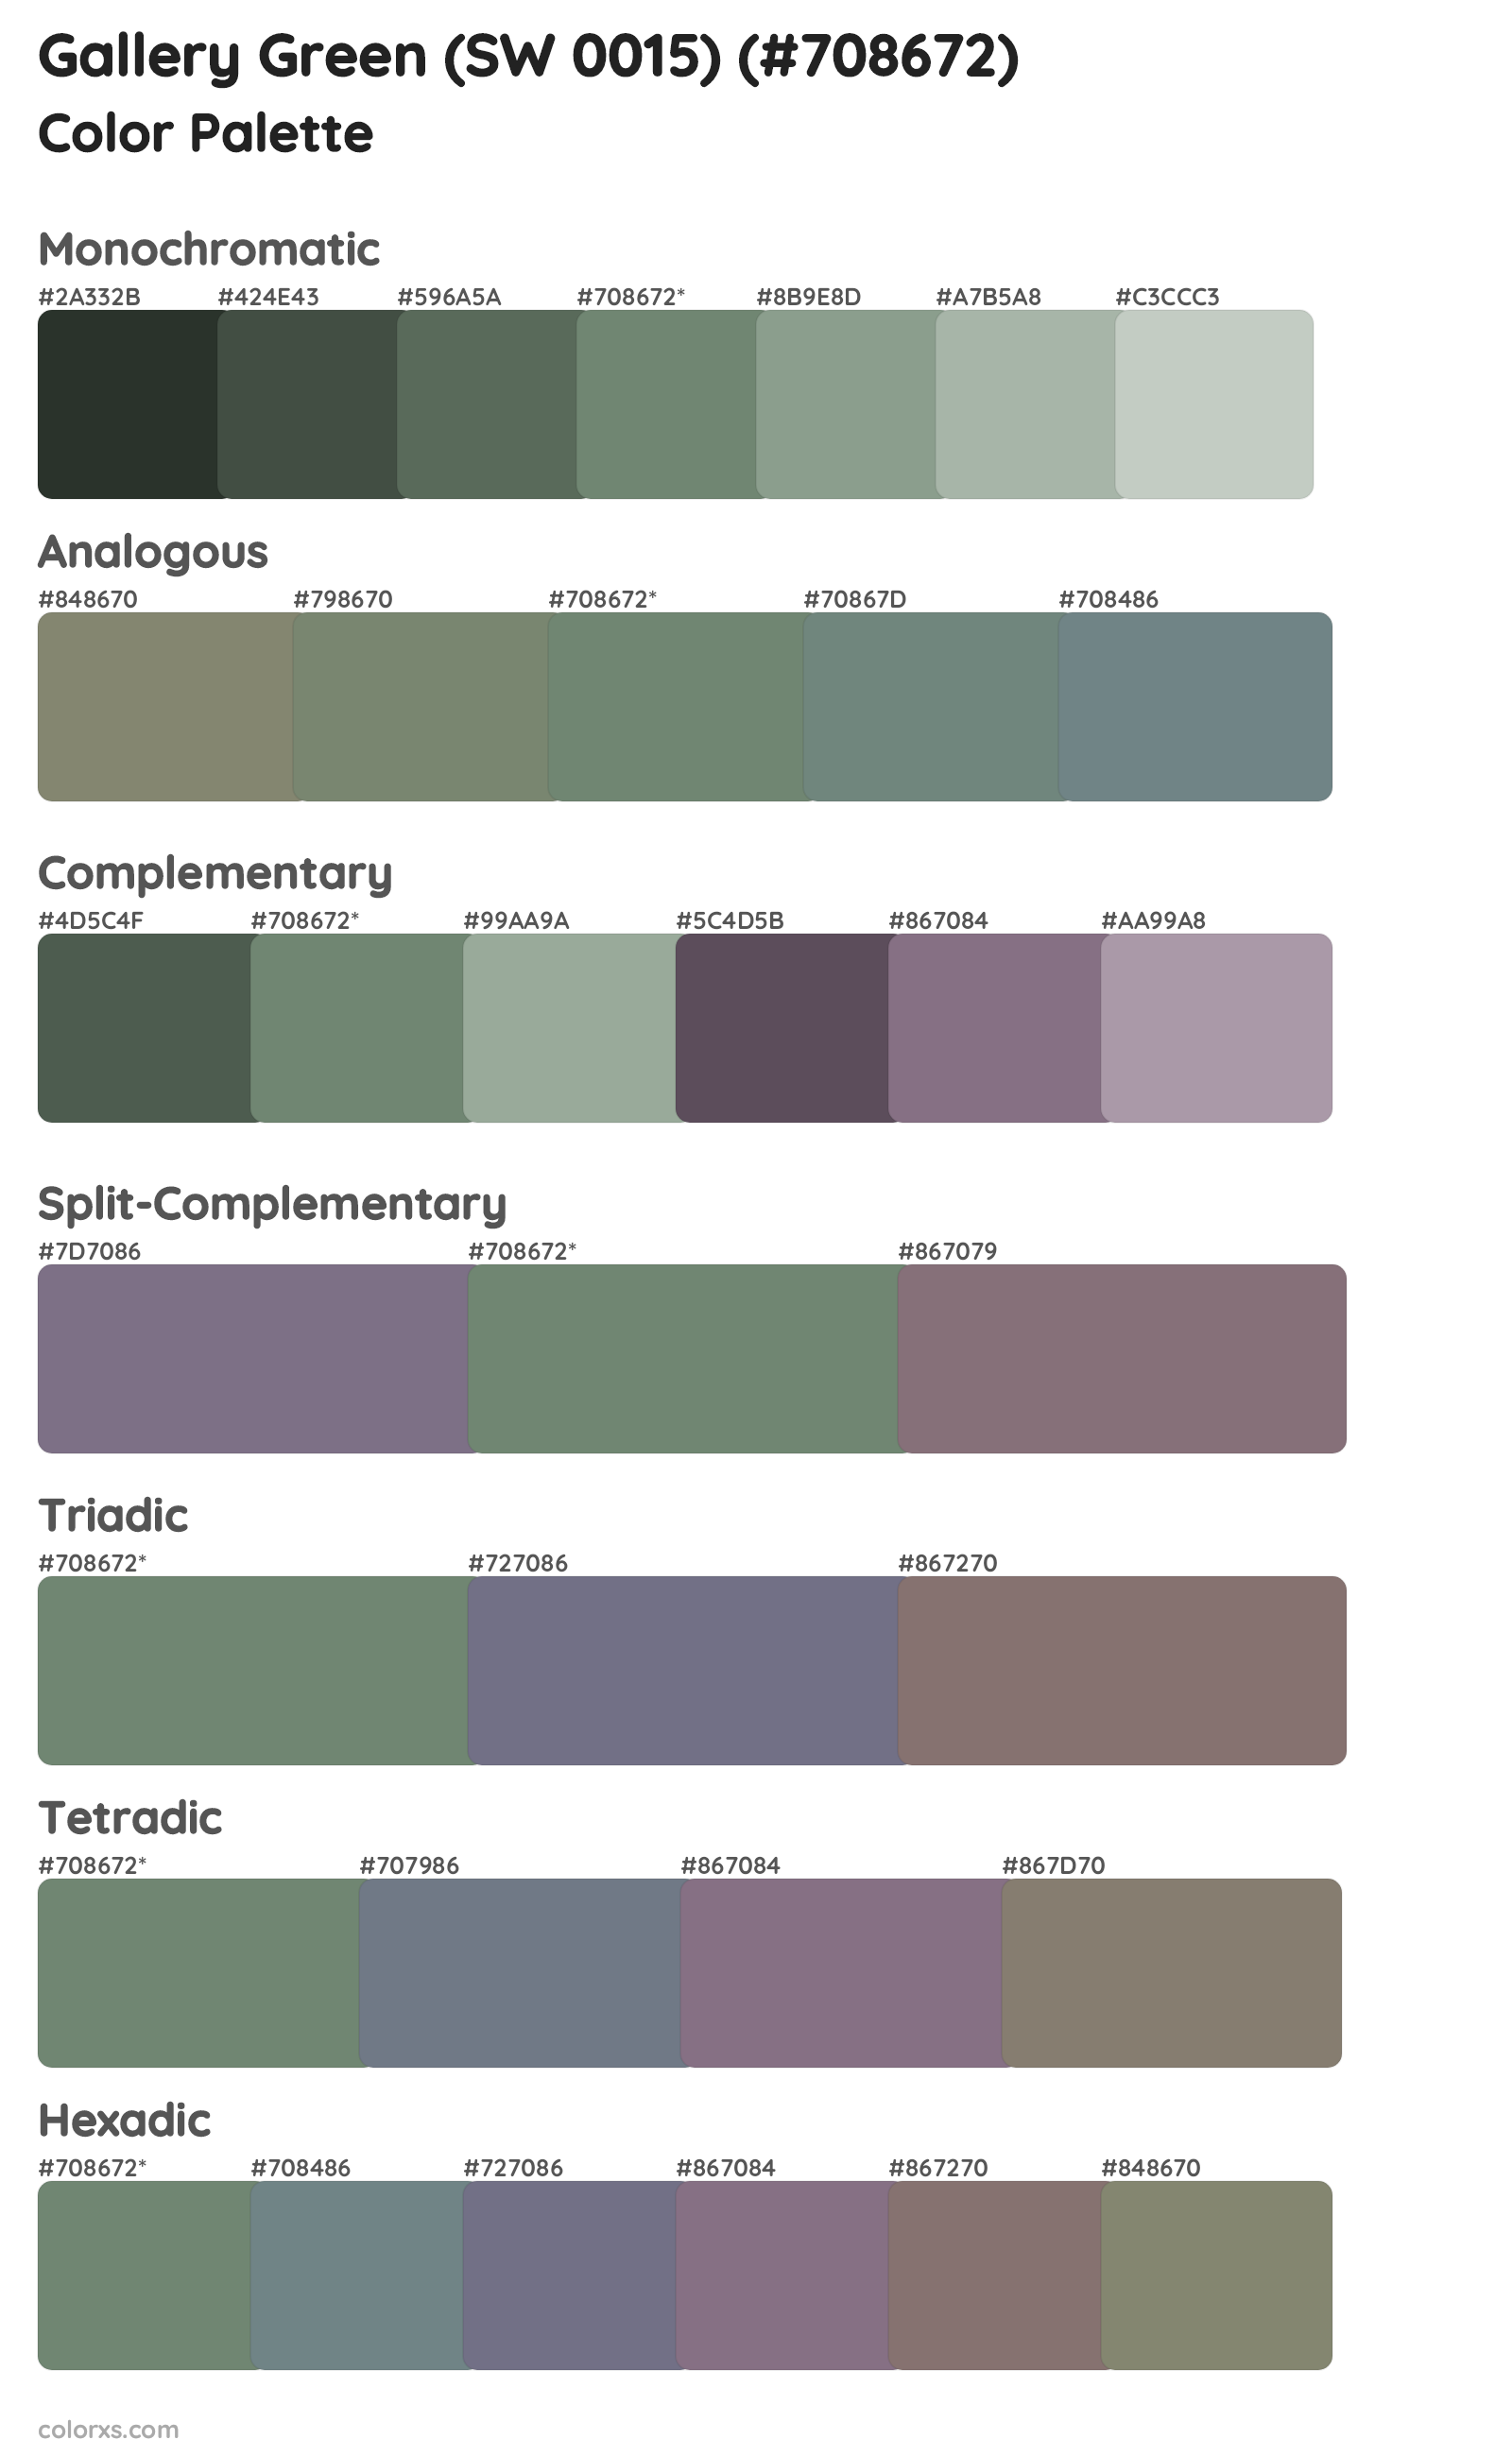 Gallery Green (SW 0015) Color Scheme Palettes